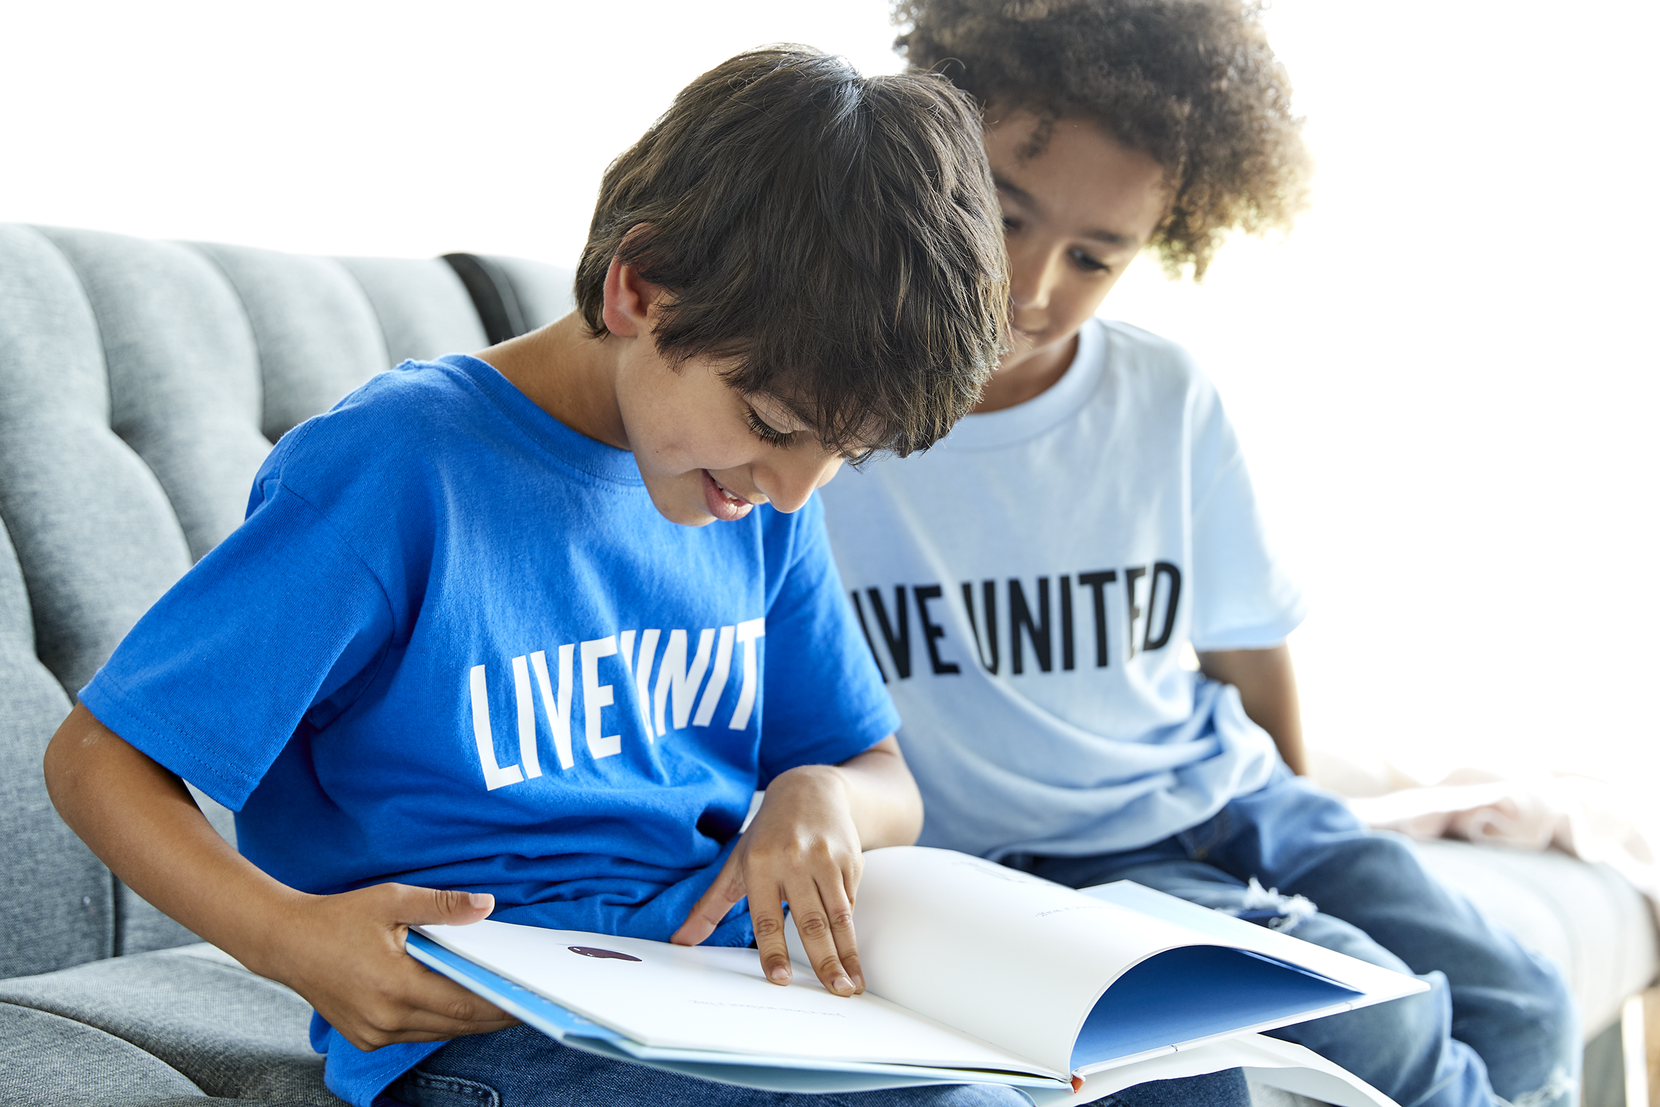 Two young boys read a book while sitting on a couch